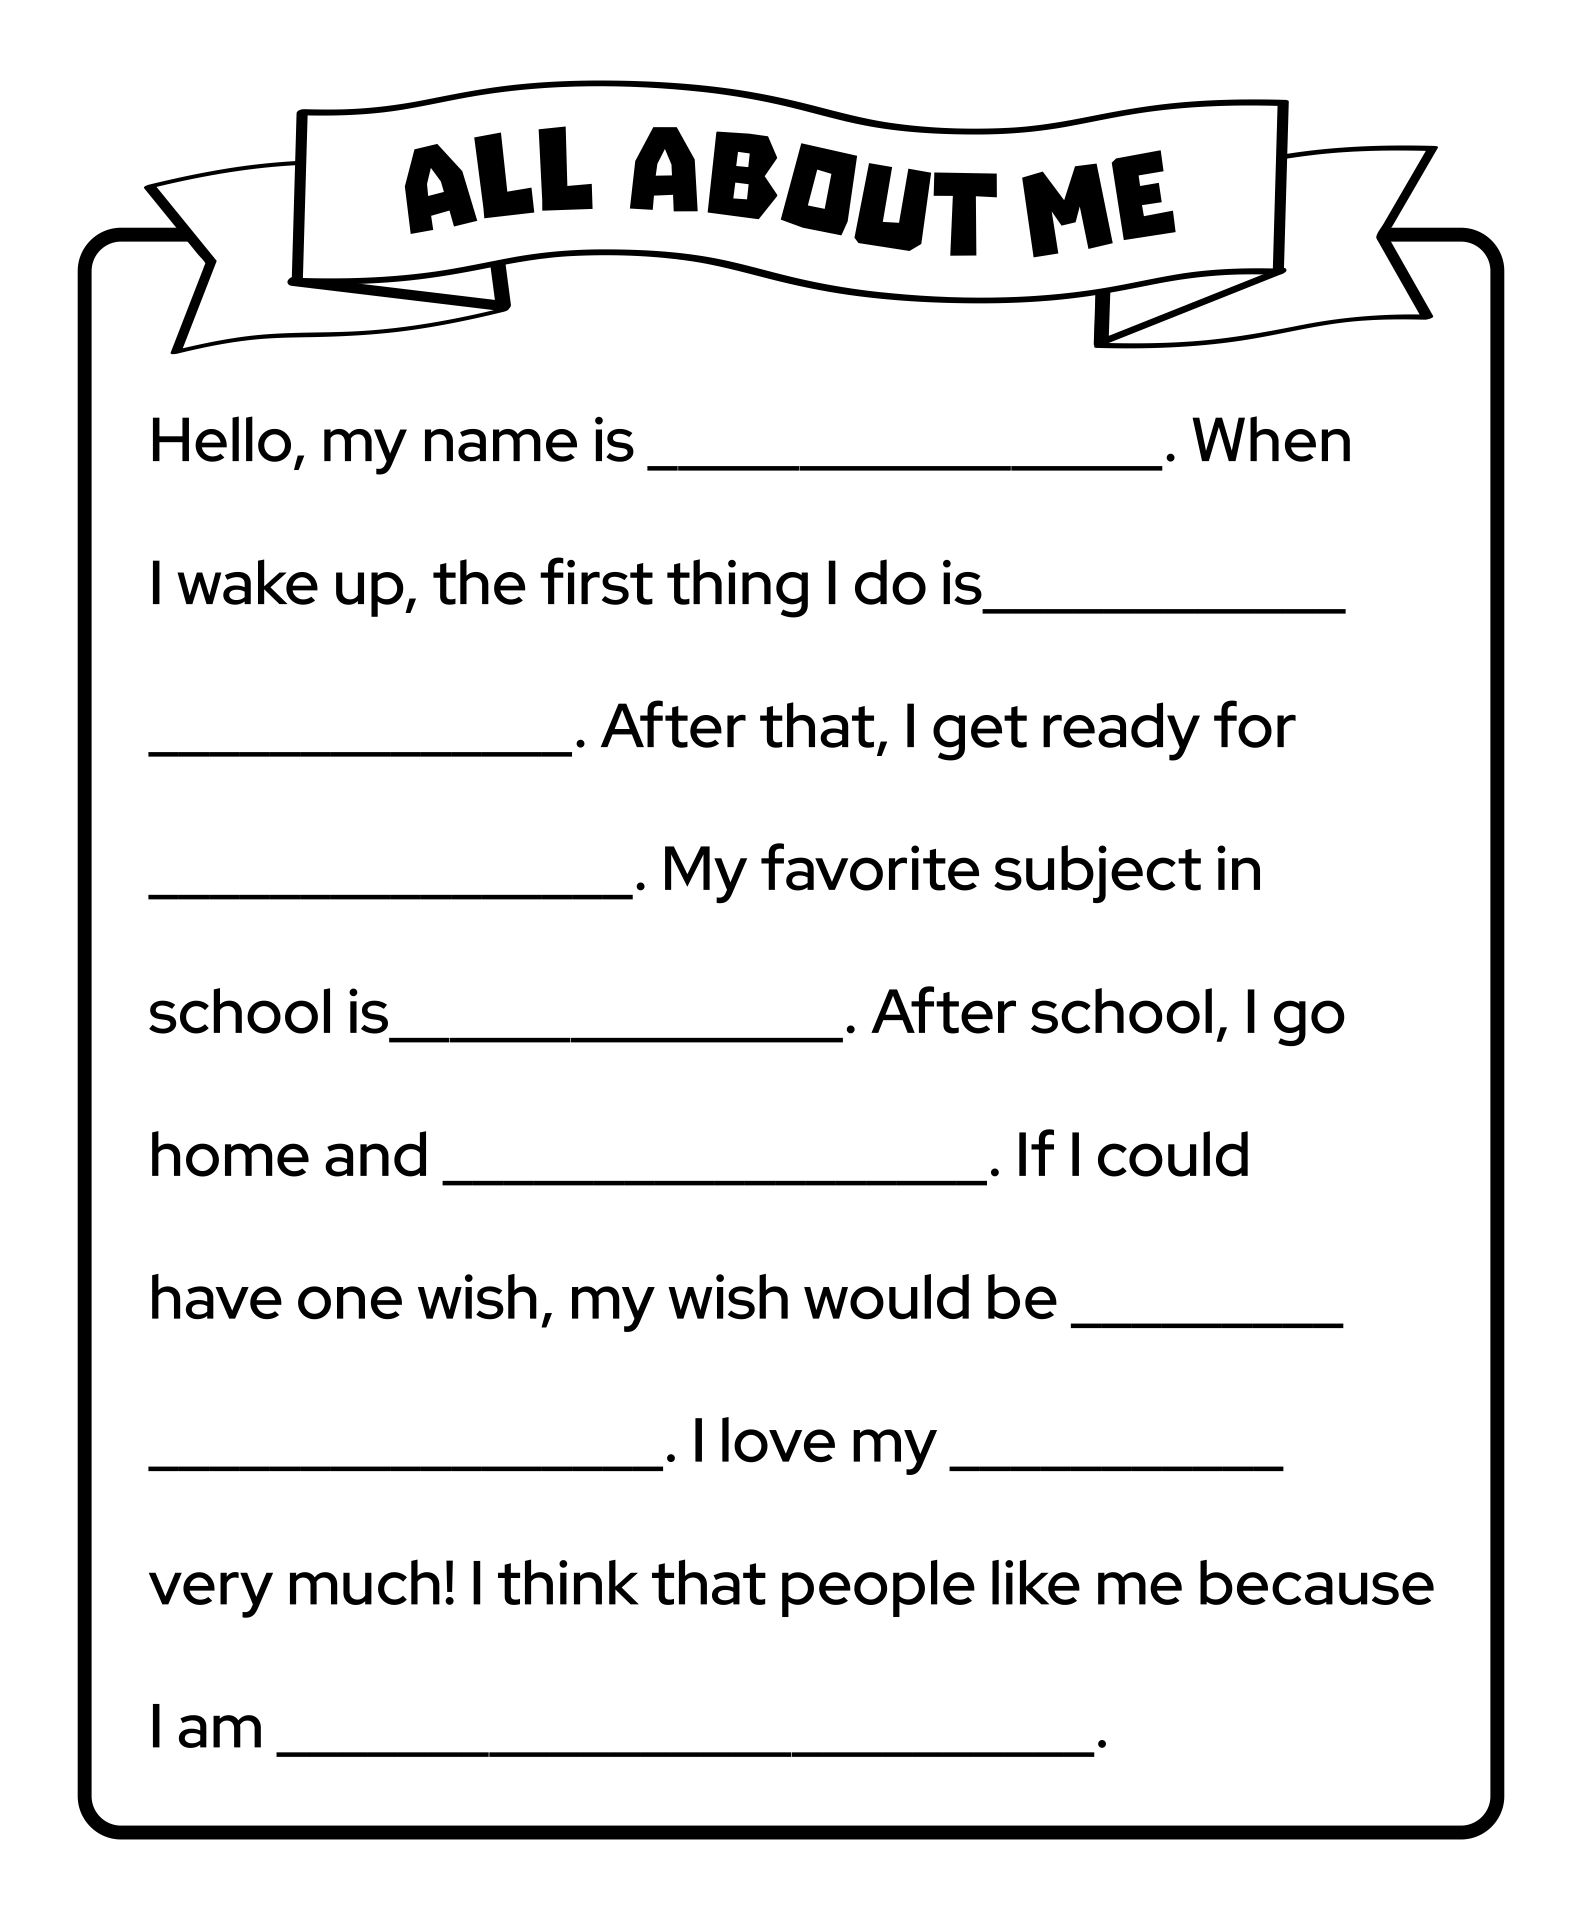 all-about-me-free-printable-pdf-templates-printable-download